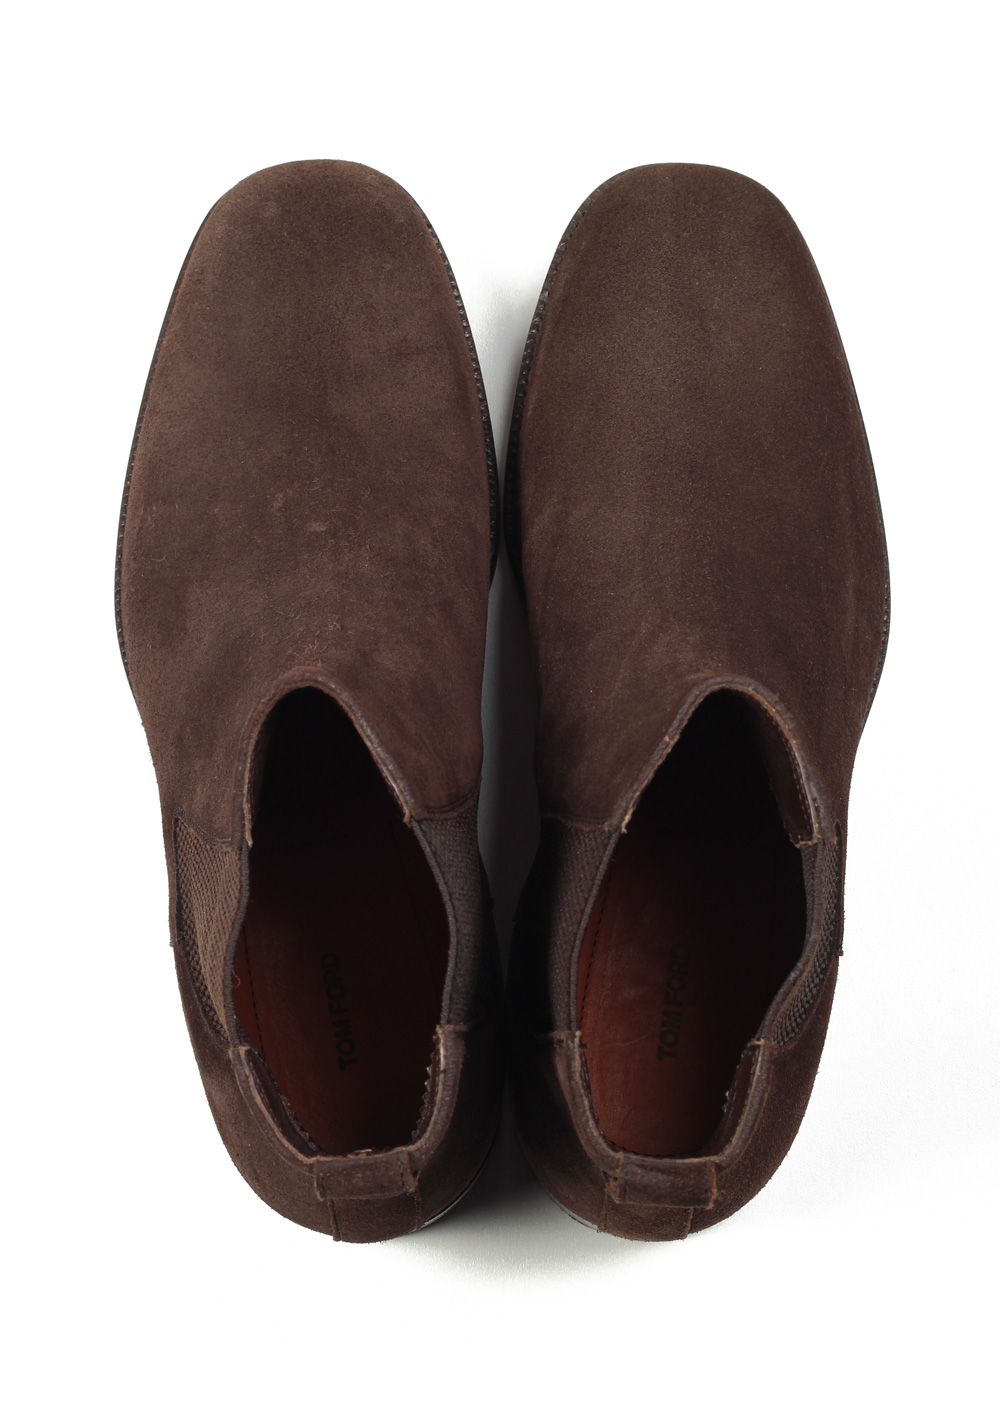 TOM FORD Wilson Brown Suede Chelsea Boots Shoes Size 10.5 Uk / 11.5 U.S. | Costume Limité